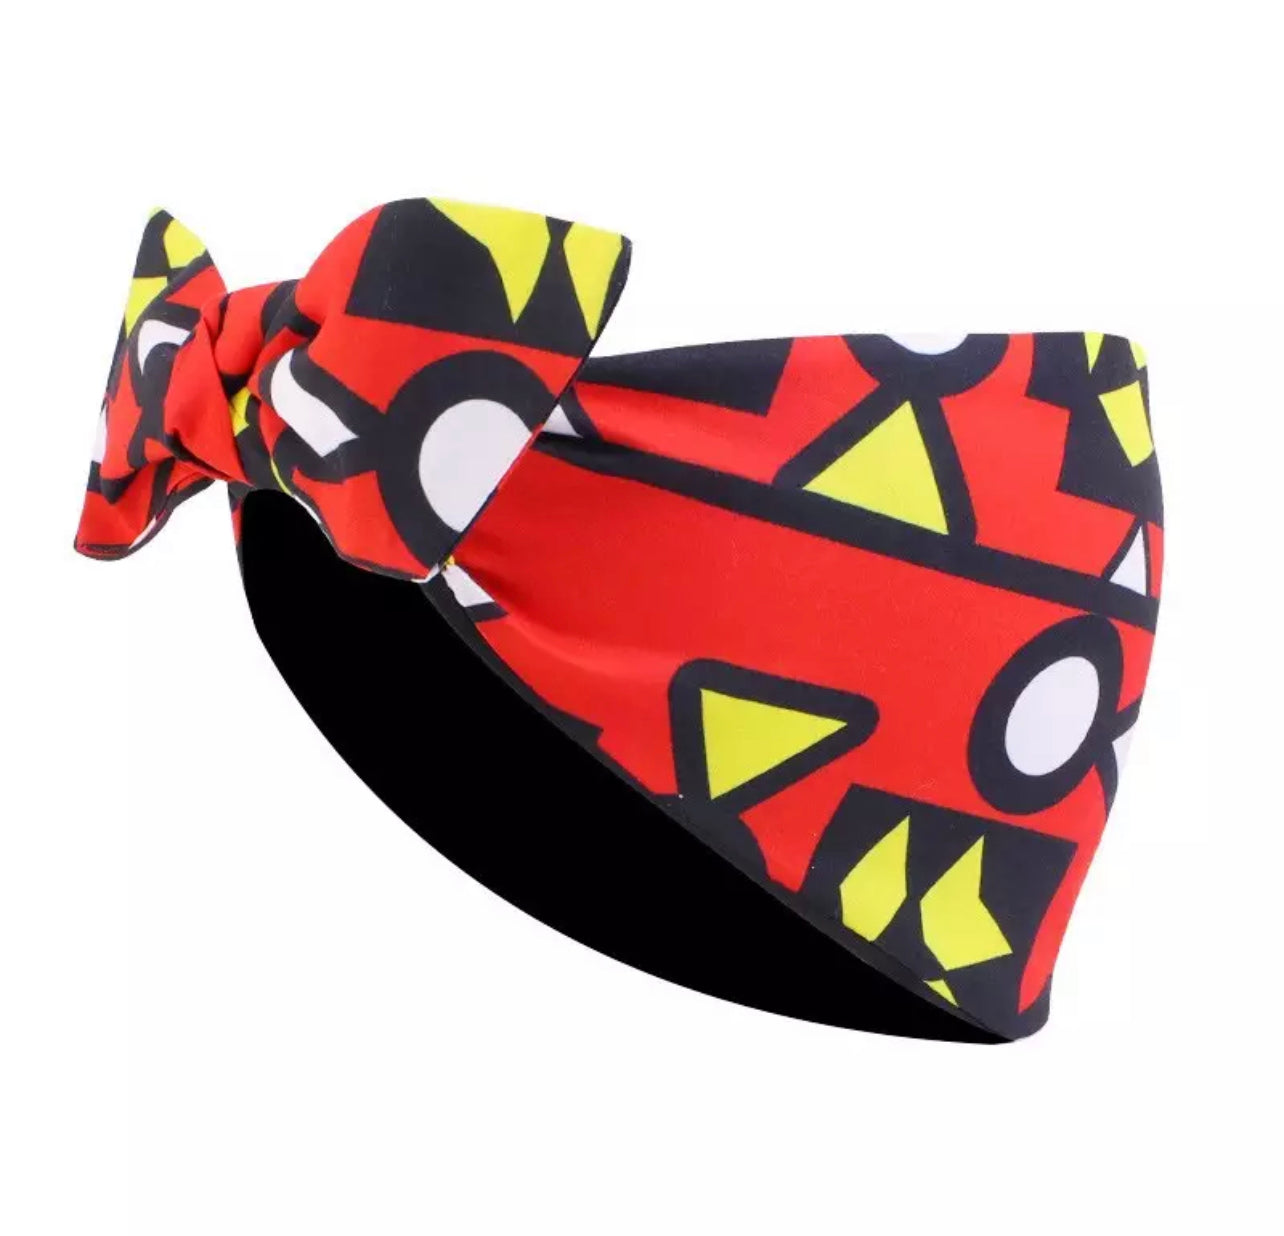 Head band with prints